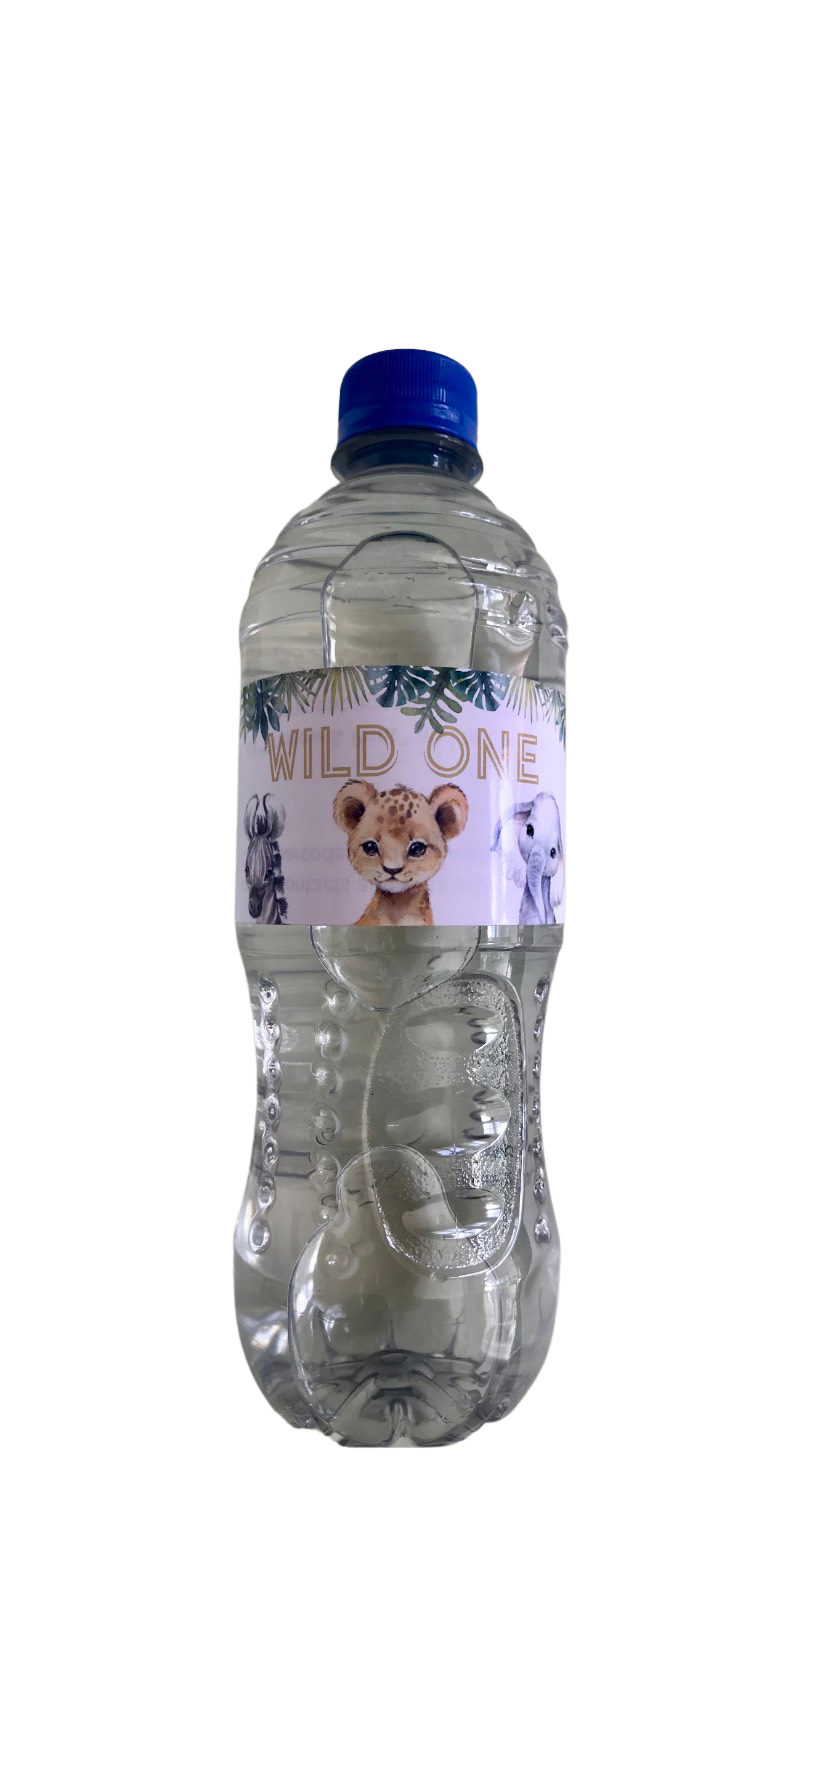 Wild one water labels